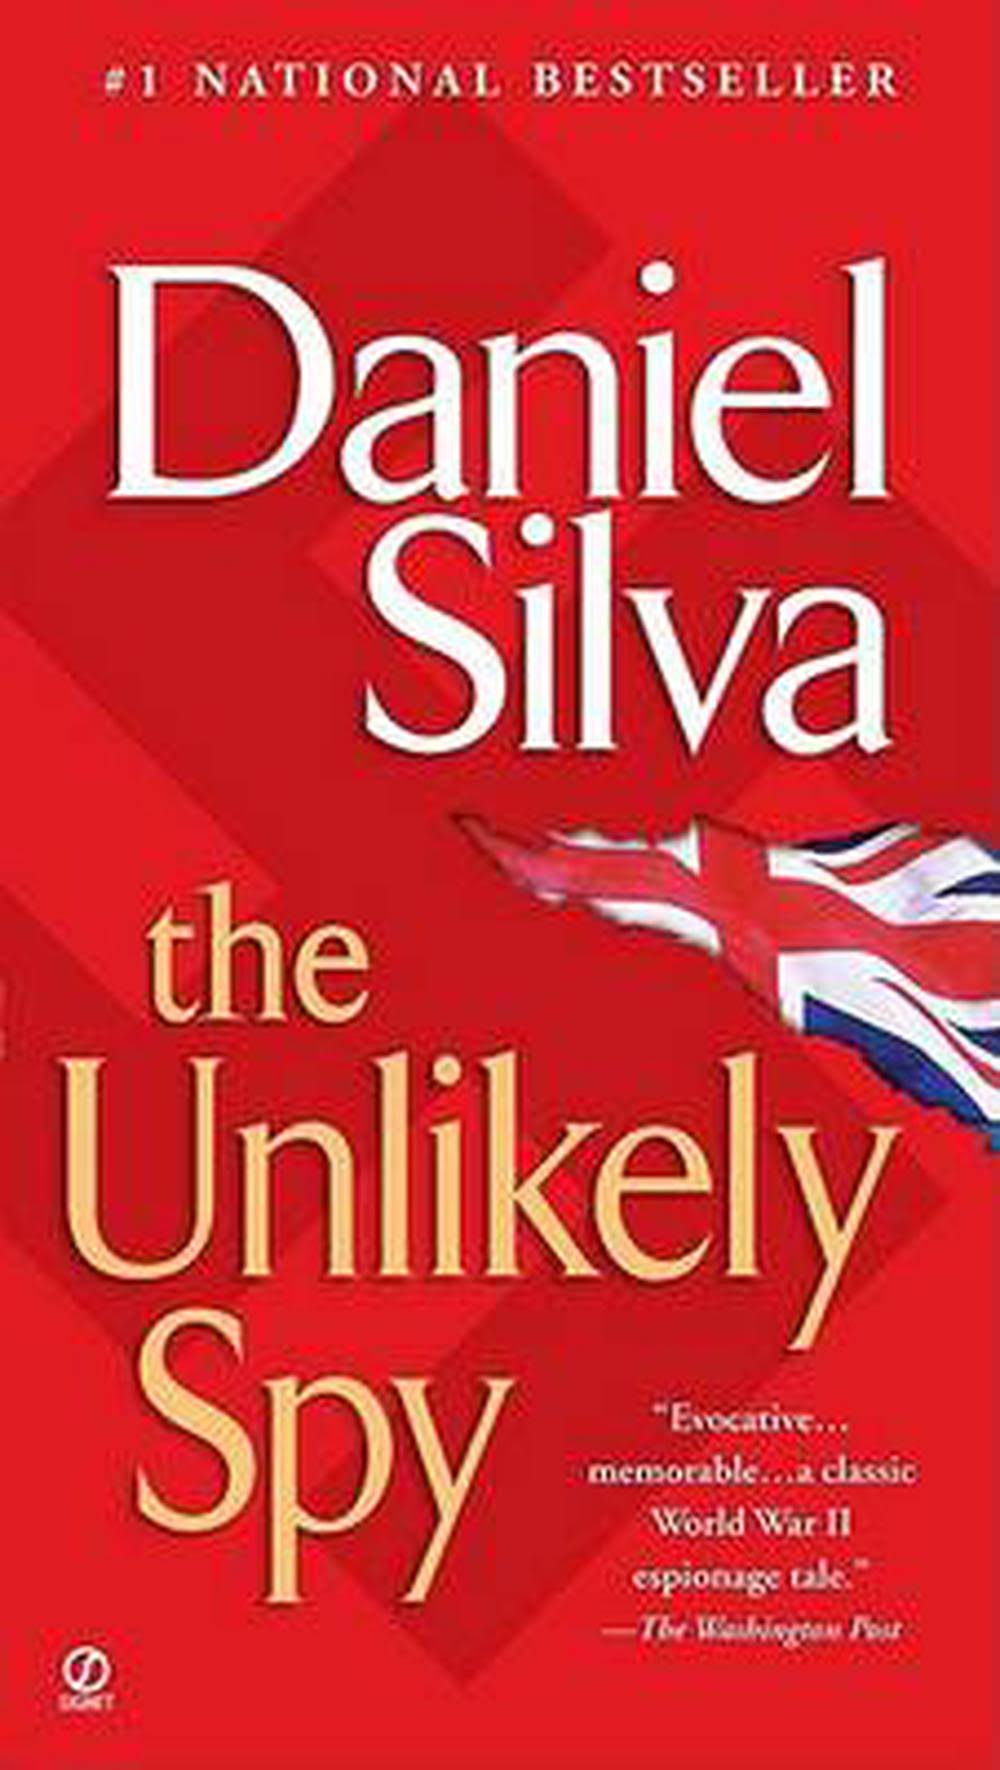 The Unlikely Spy [Book]